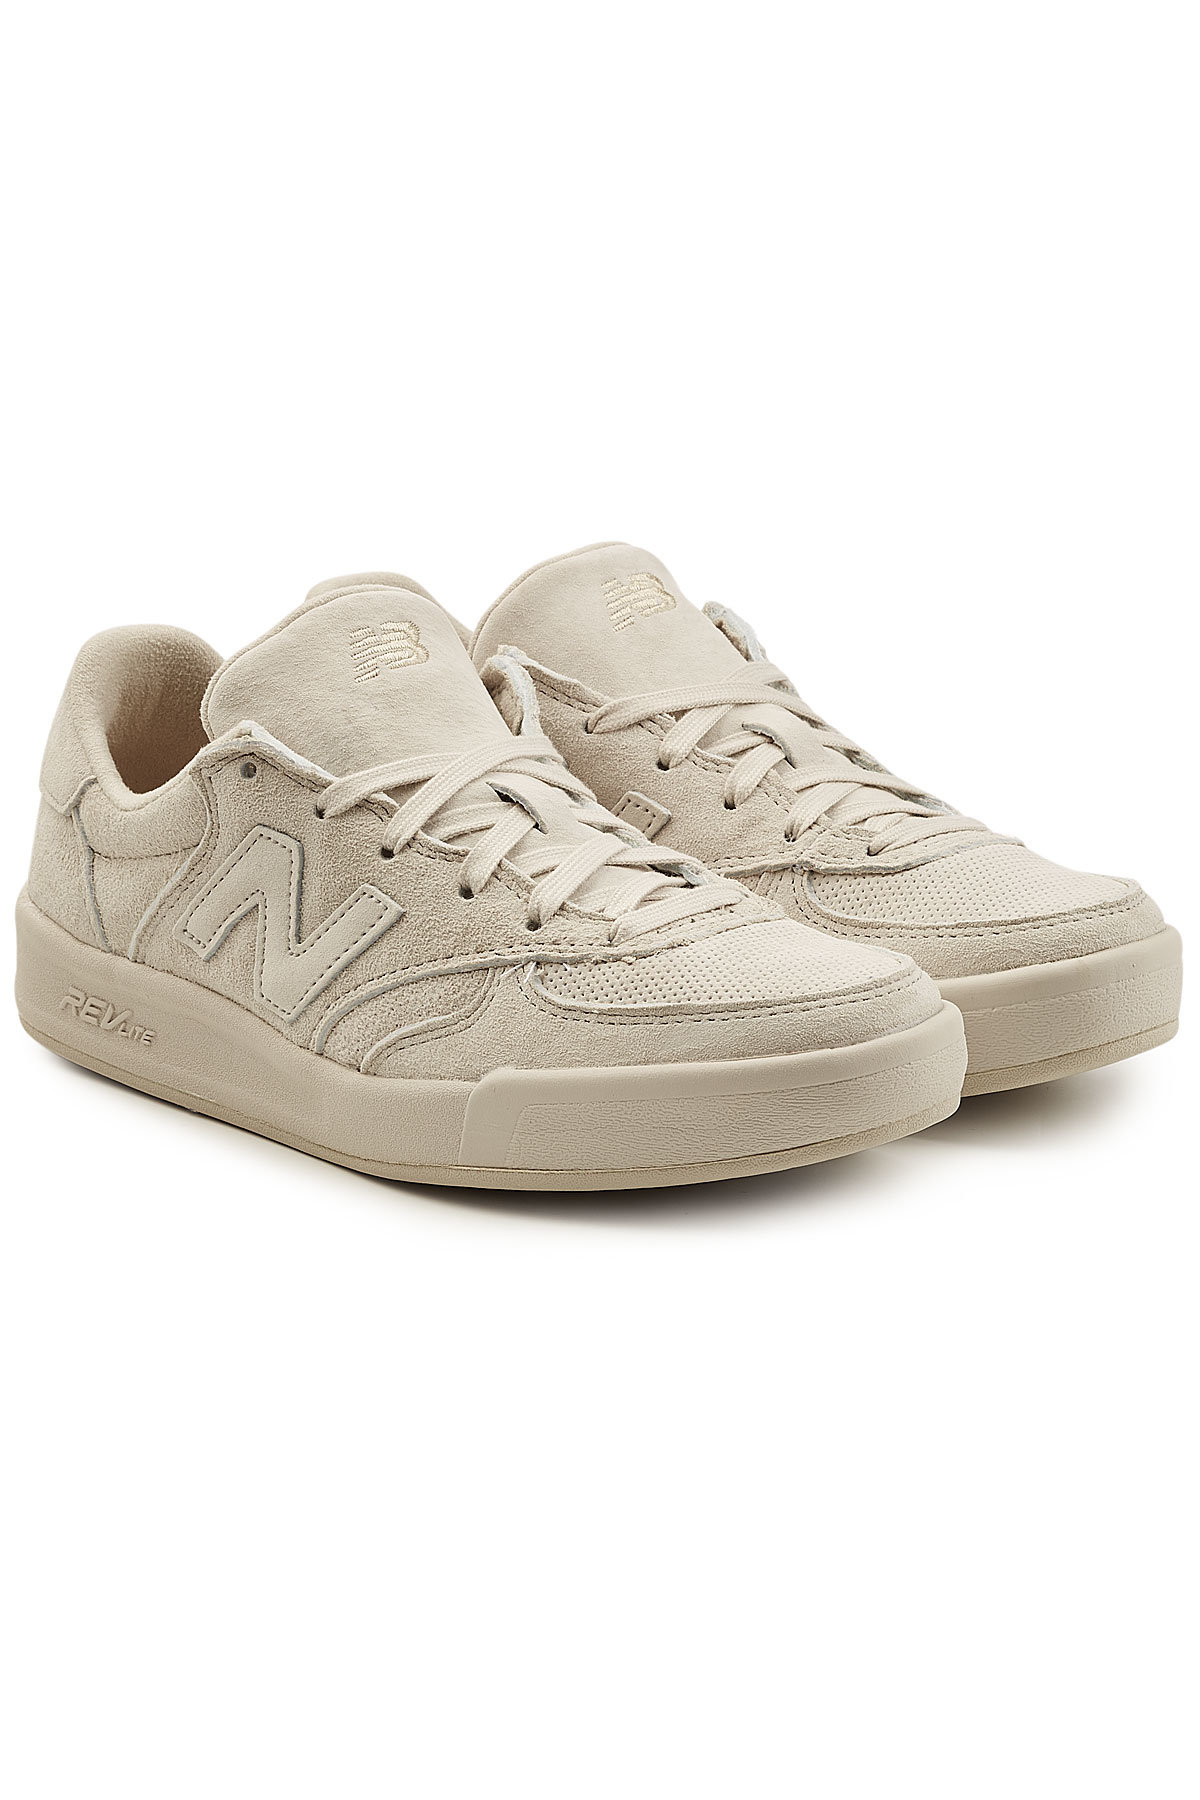 New Balance - WRT300 Suede Sneakers